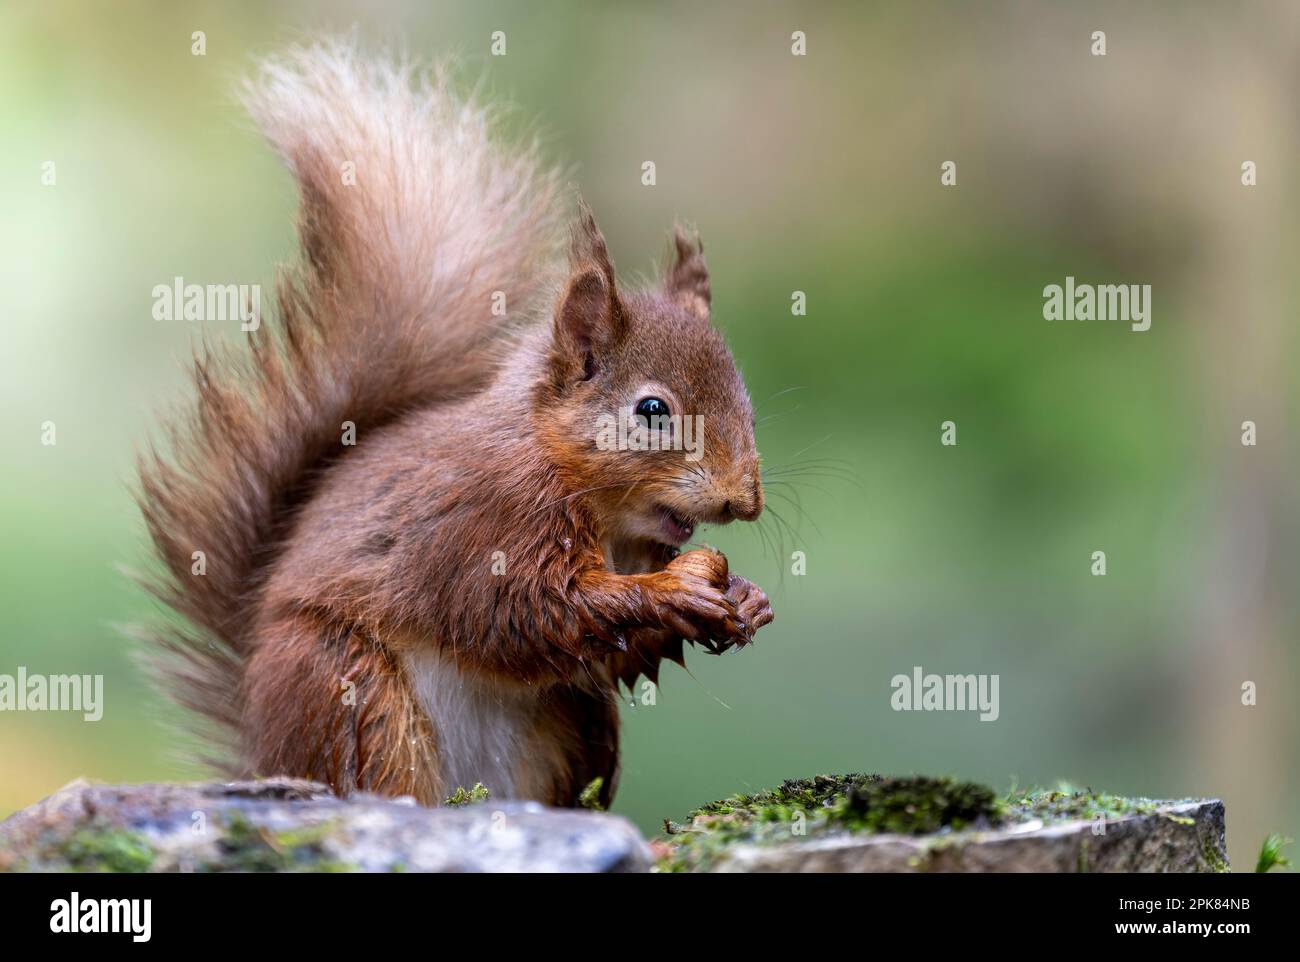 A solitary British Red Squirrel, (Sciurus vulgaris), sitting on a rock and eating a Hazlenut, its staple diet Stock Photo